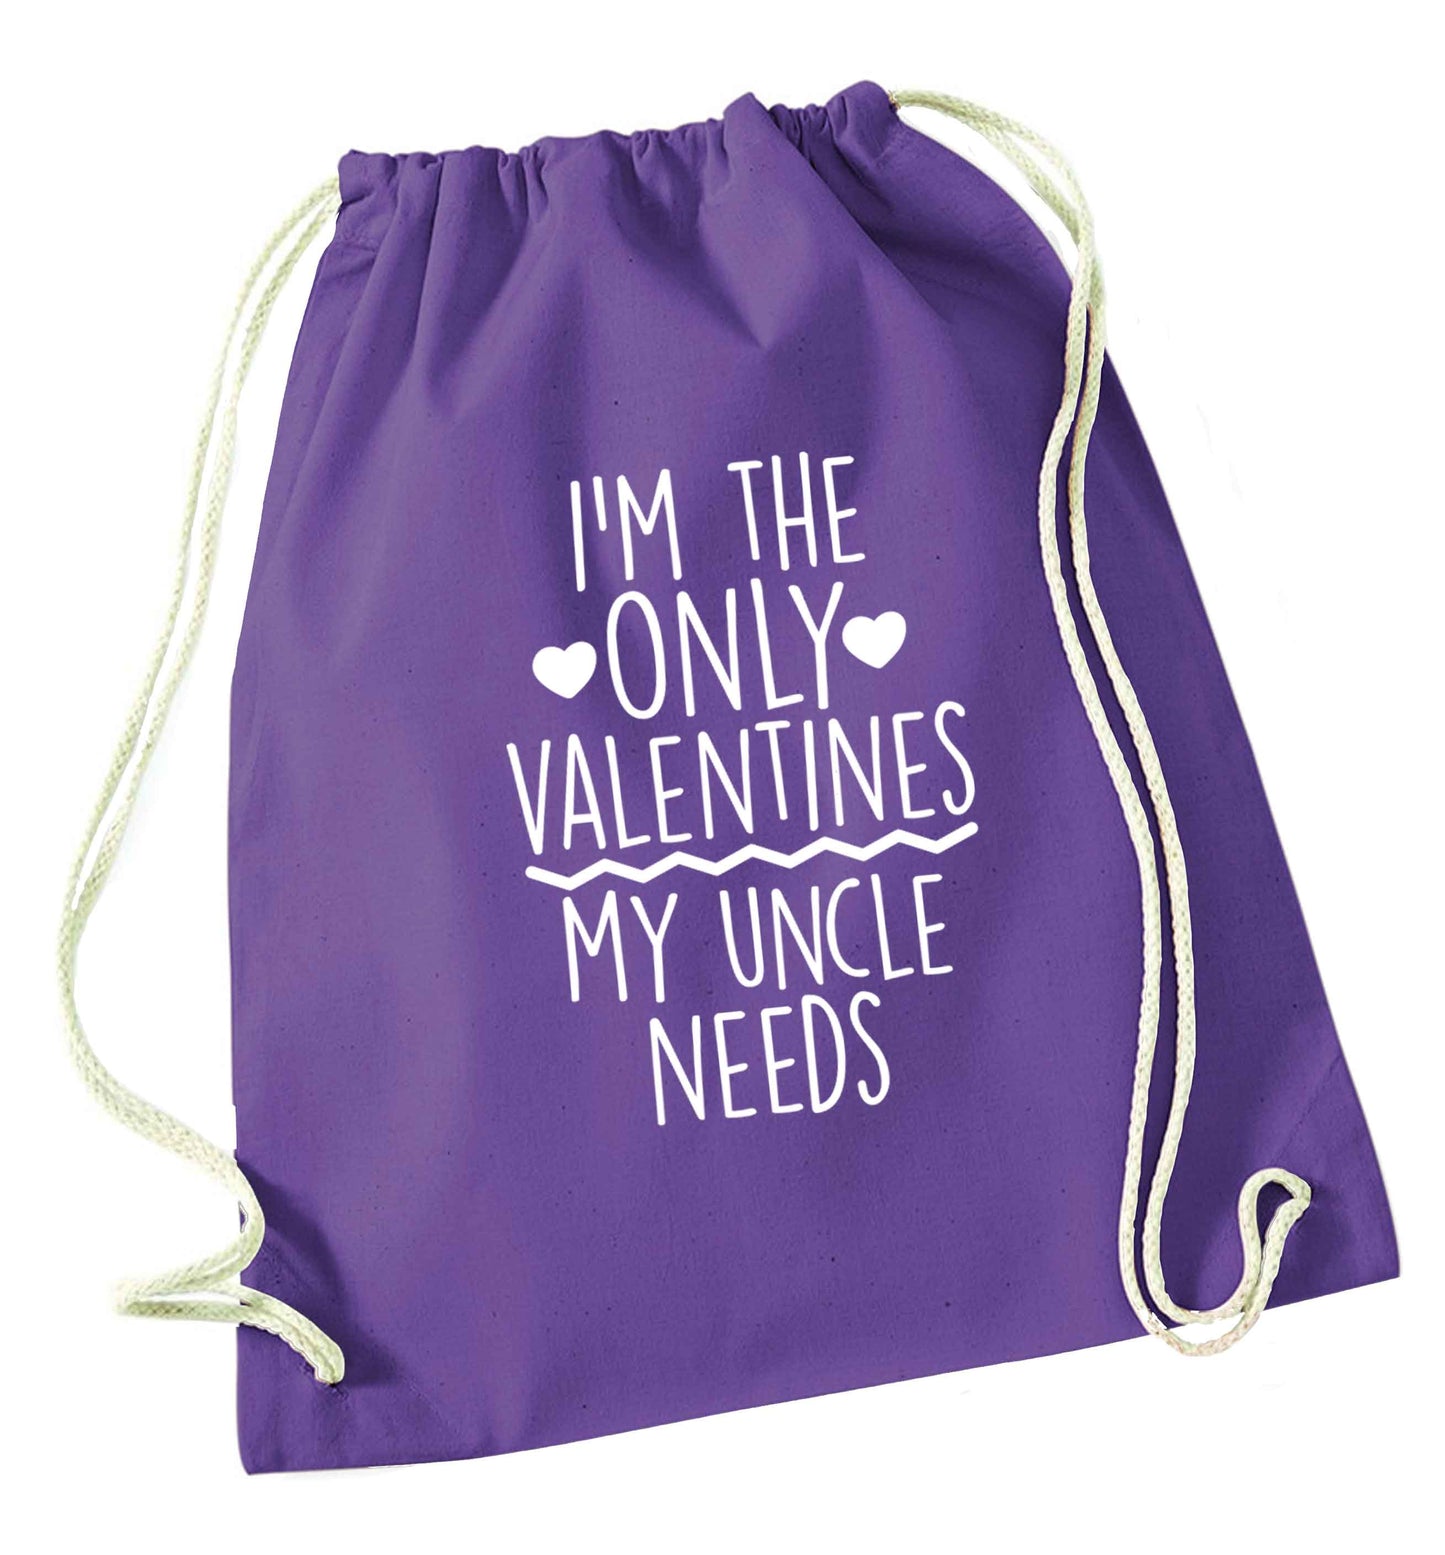 I'm the only valentines my uncle needs purple drawstring bag